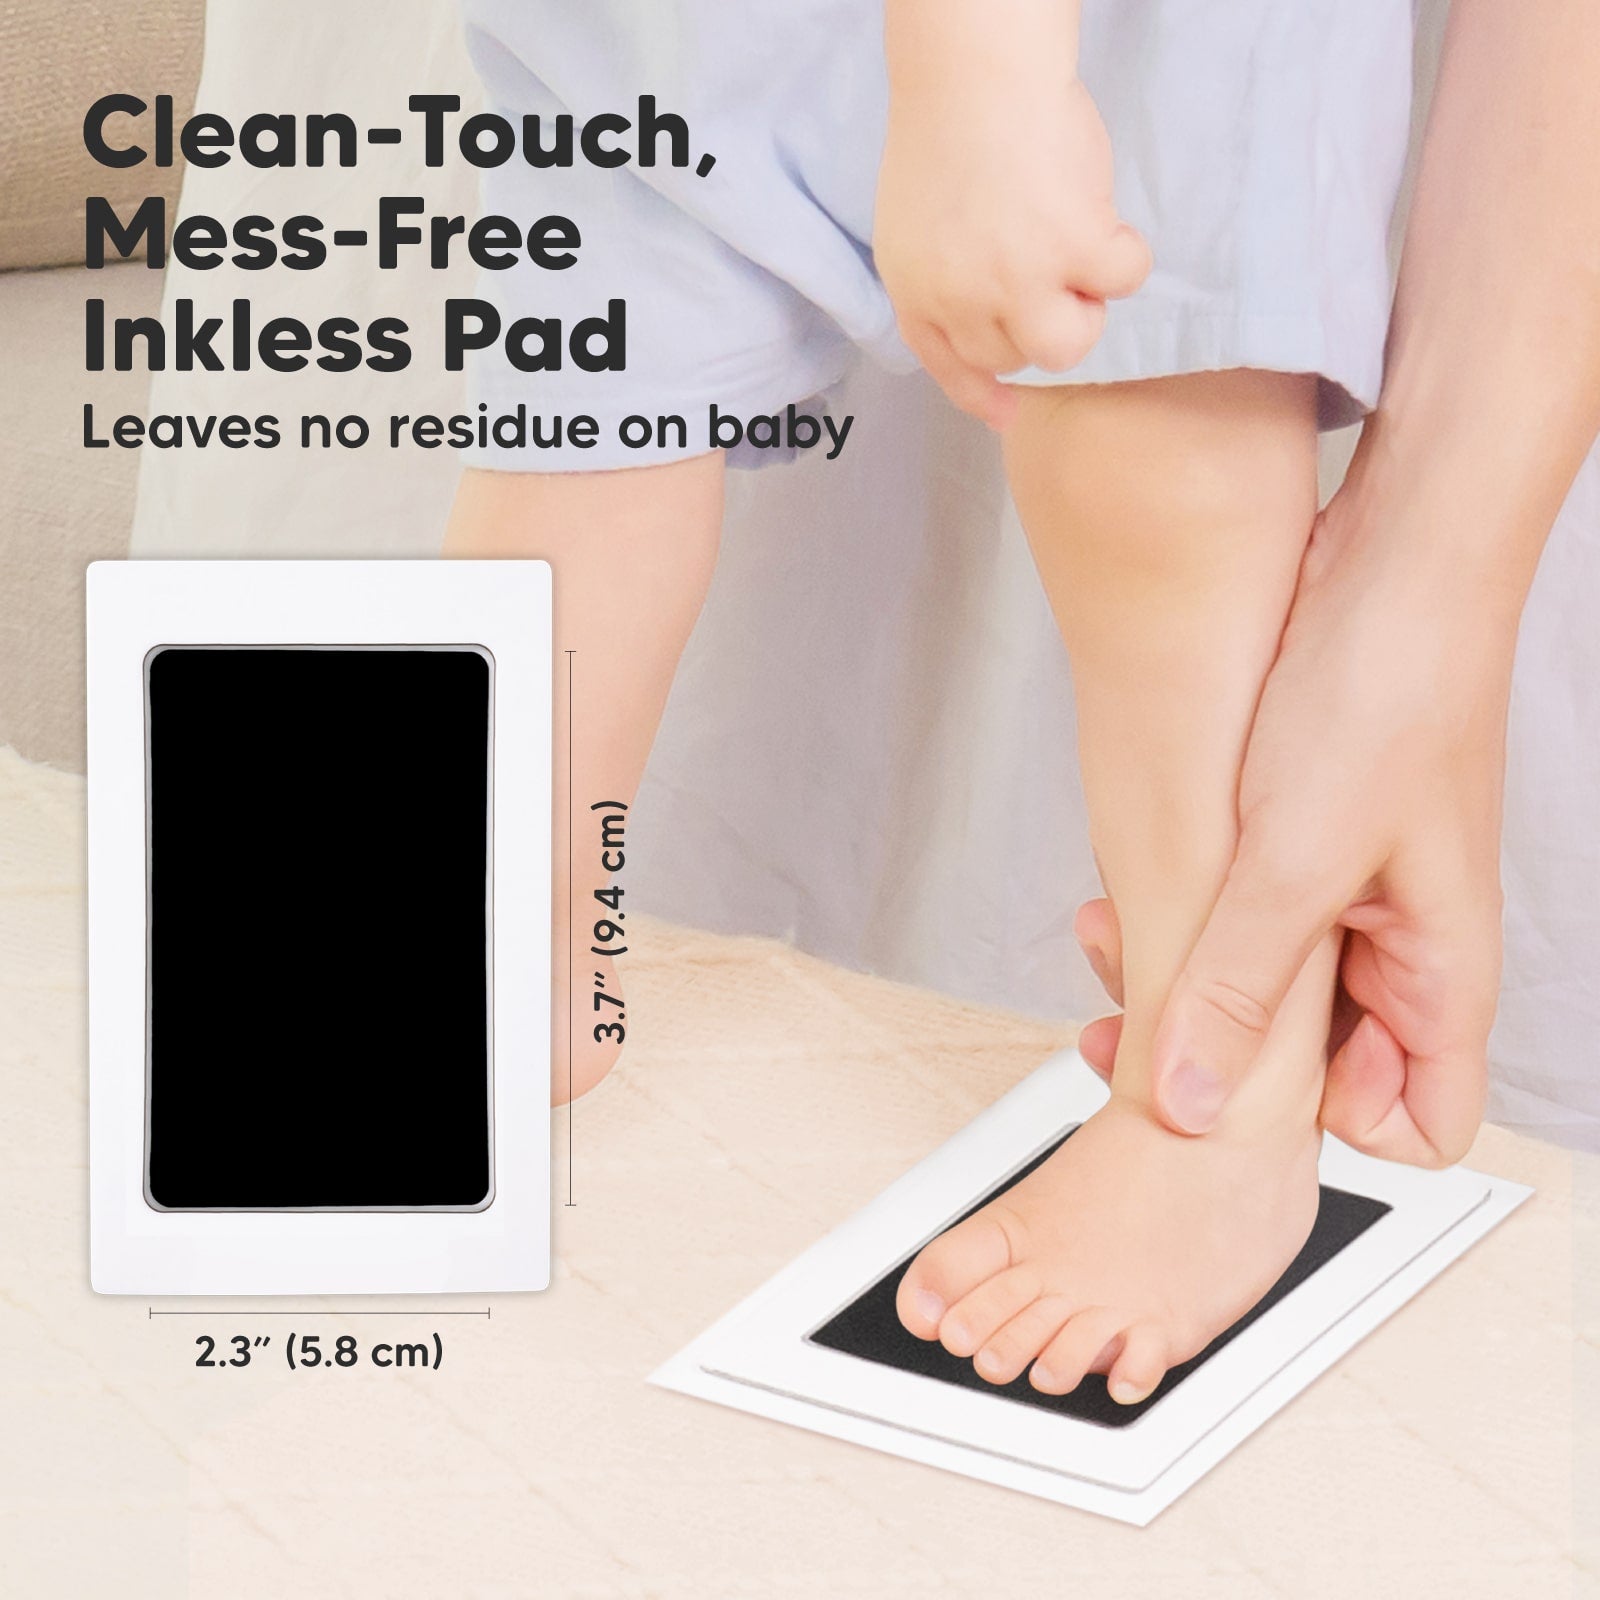 Buy A Baby Cherry Inkless Ink Pad For Baby Handprints And